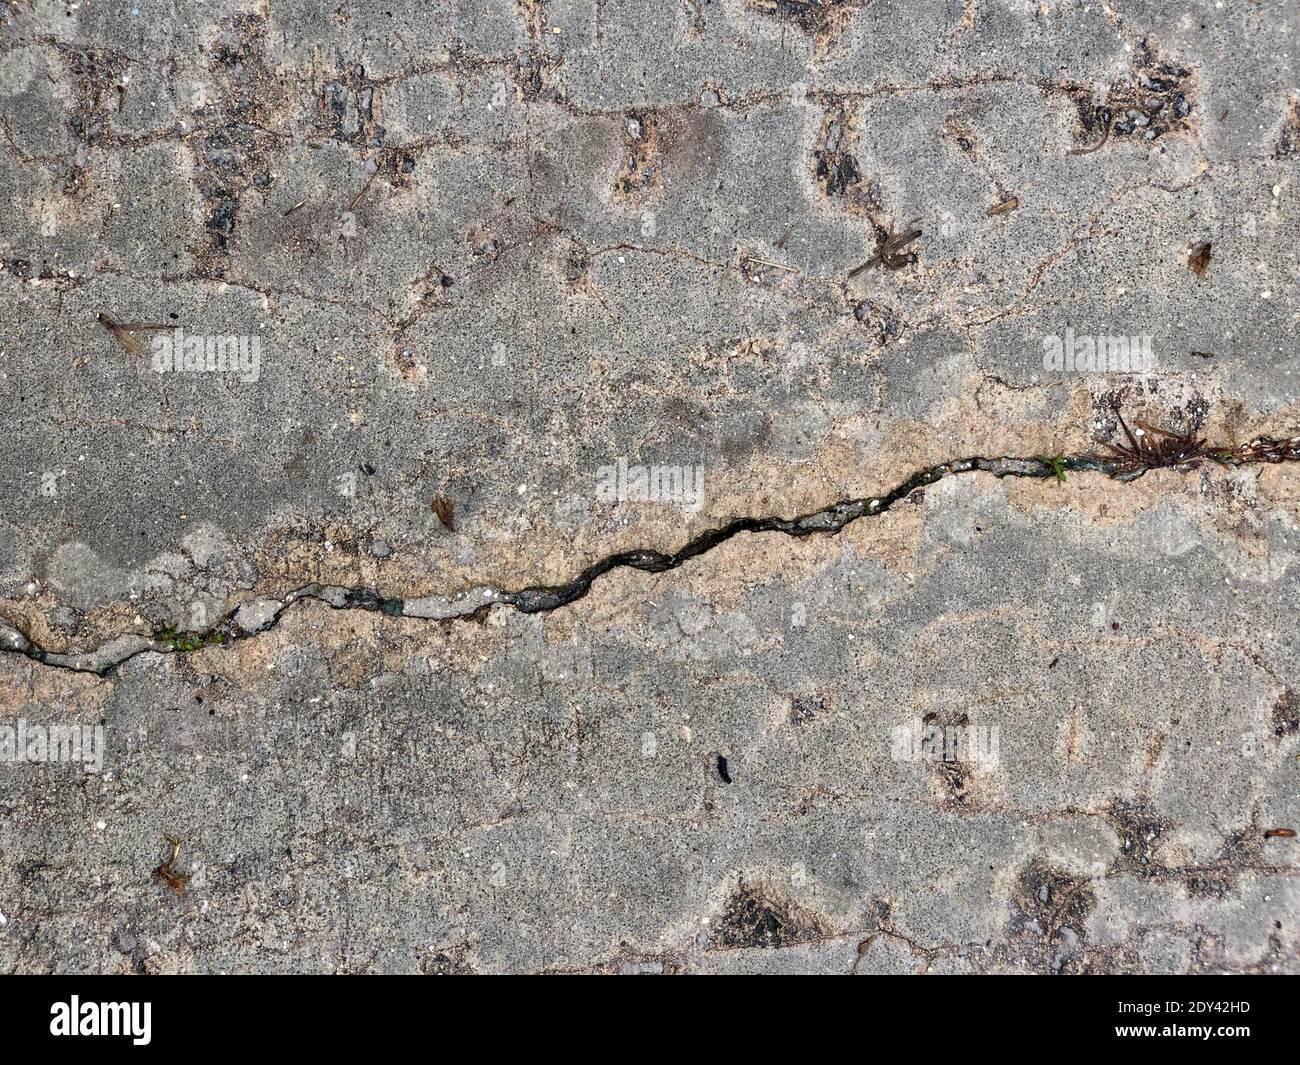 Cracked Weathered And Worn Concrete Driveway Close-up Photograph. Stock Photo